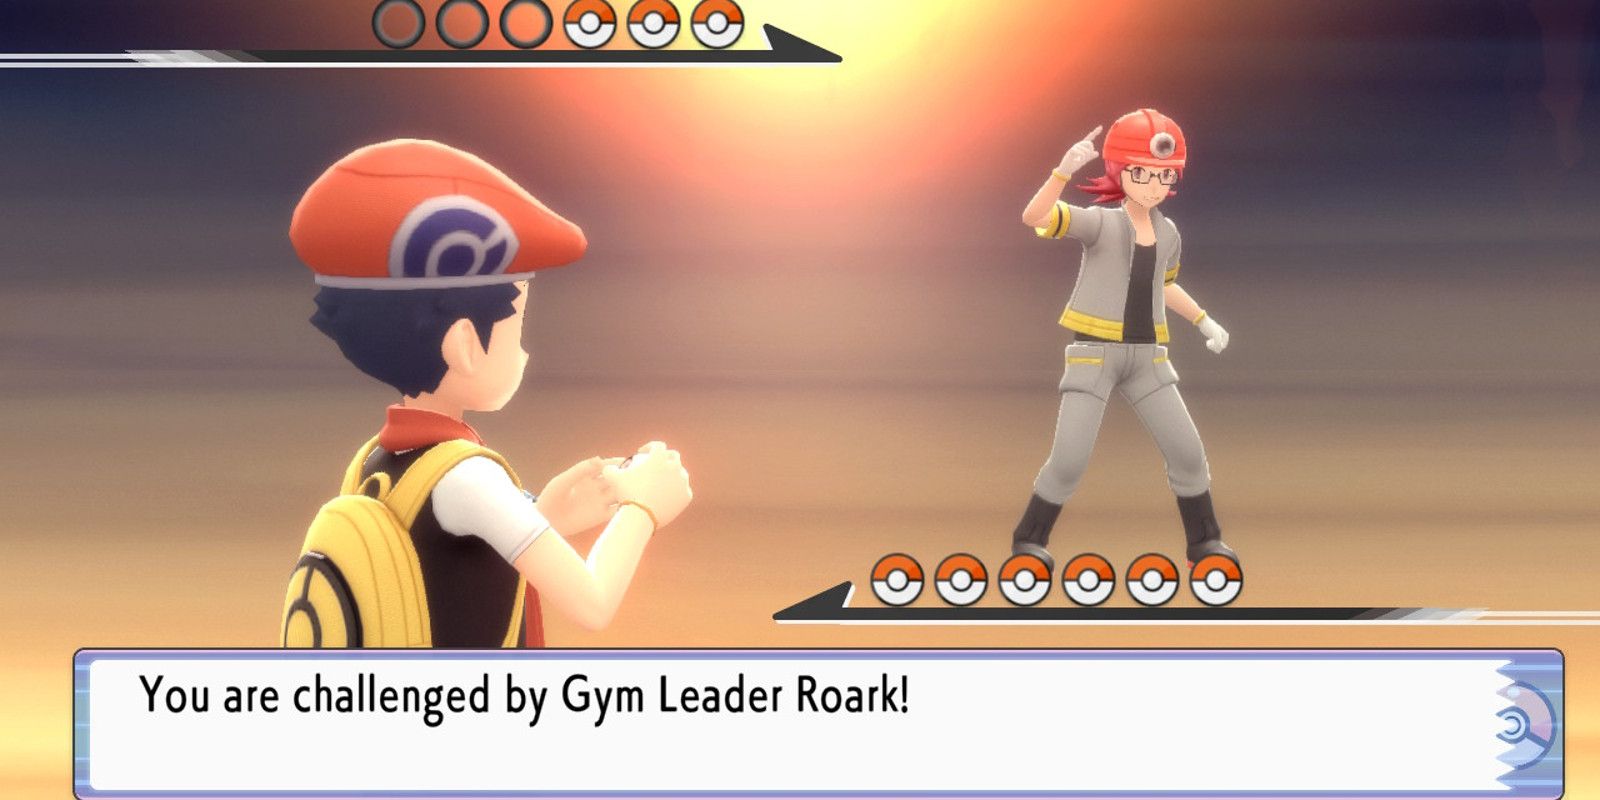 Players challenge Gym Leader Roark to a battle in Pokemon Brilliant Diamond and Shining Pearl.